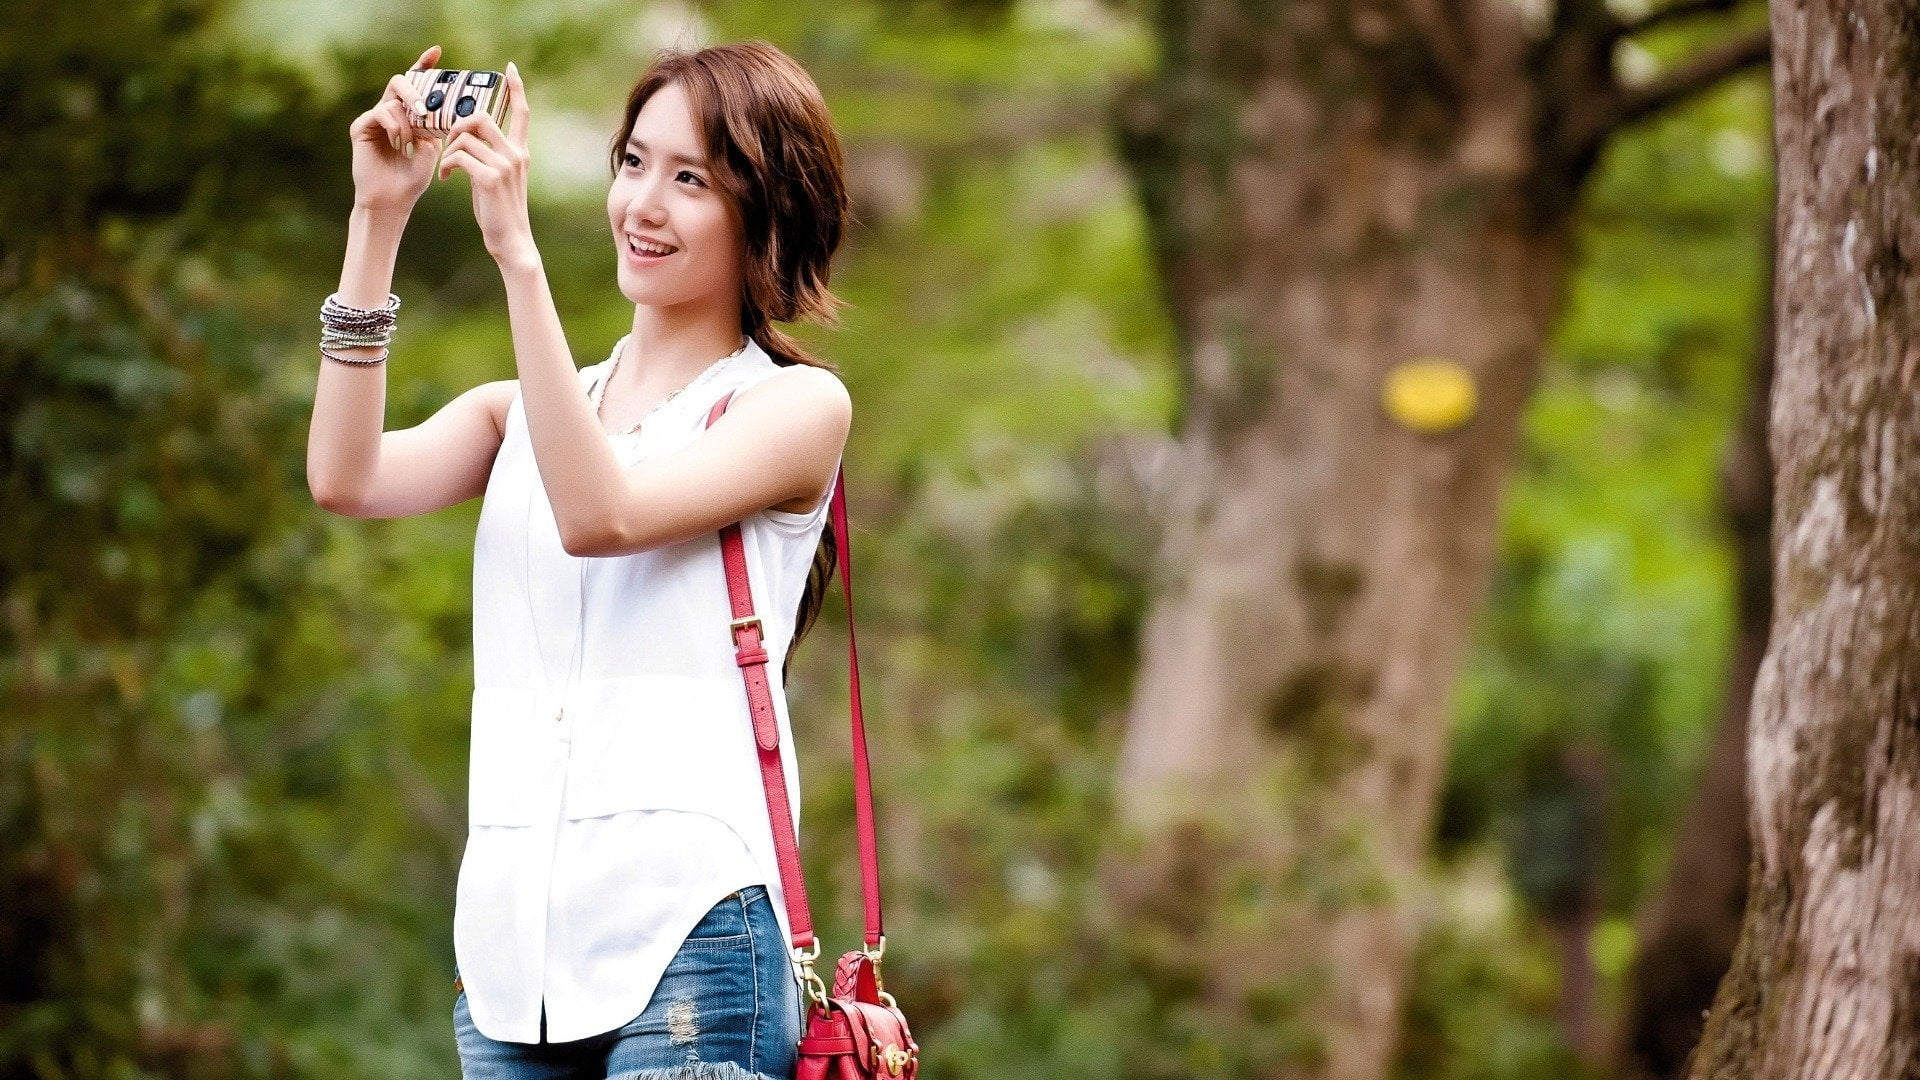 Singers, Im Yoona, one person, holding, plant, smiling, happiness